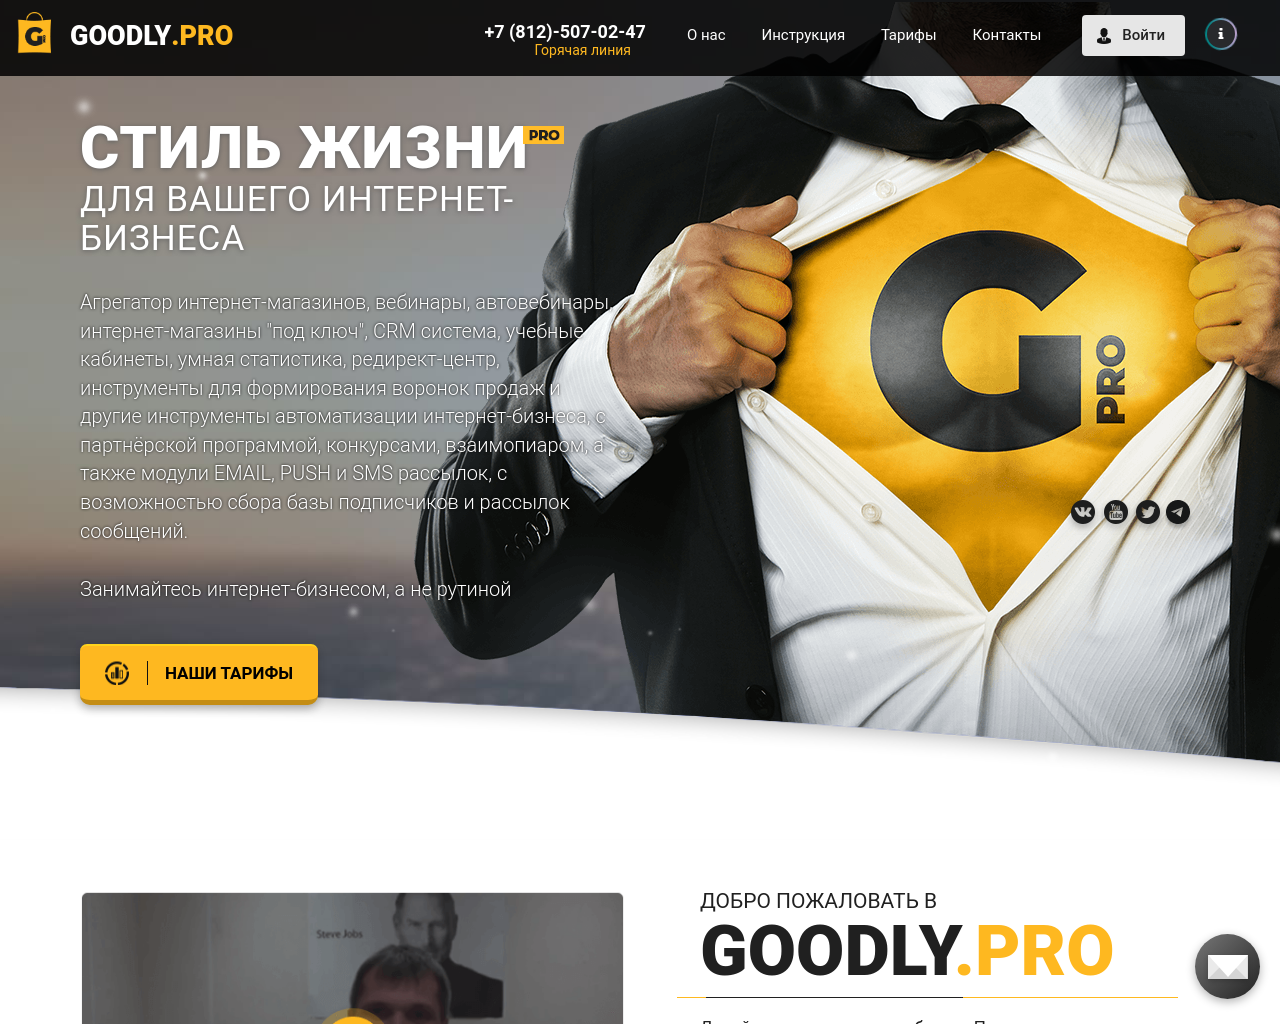 goodly.pro